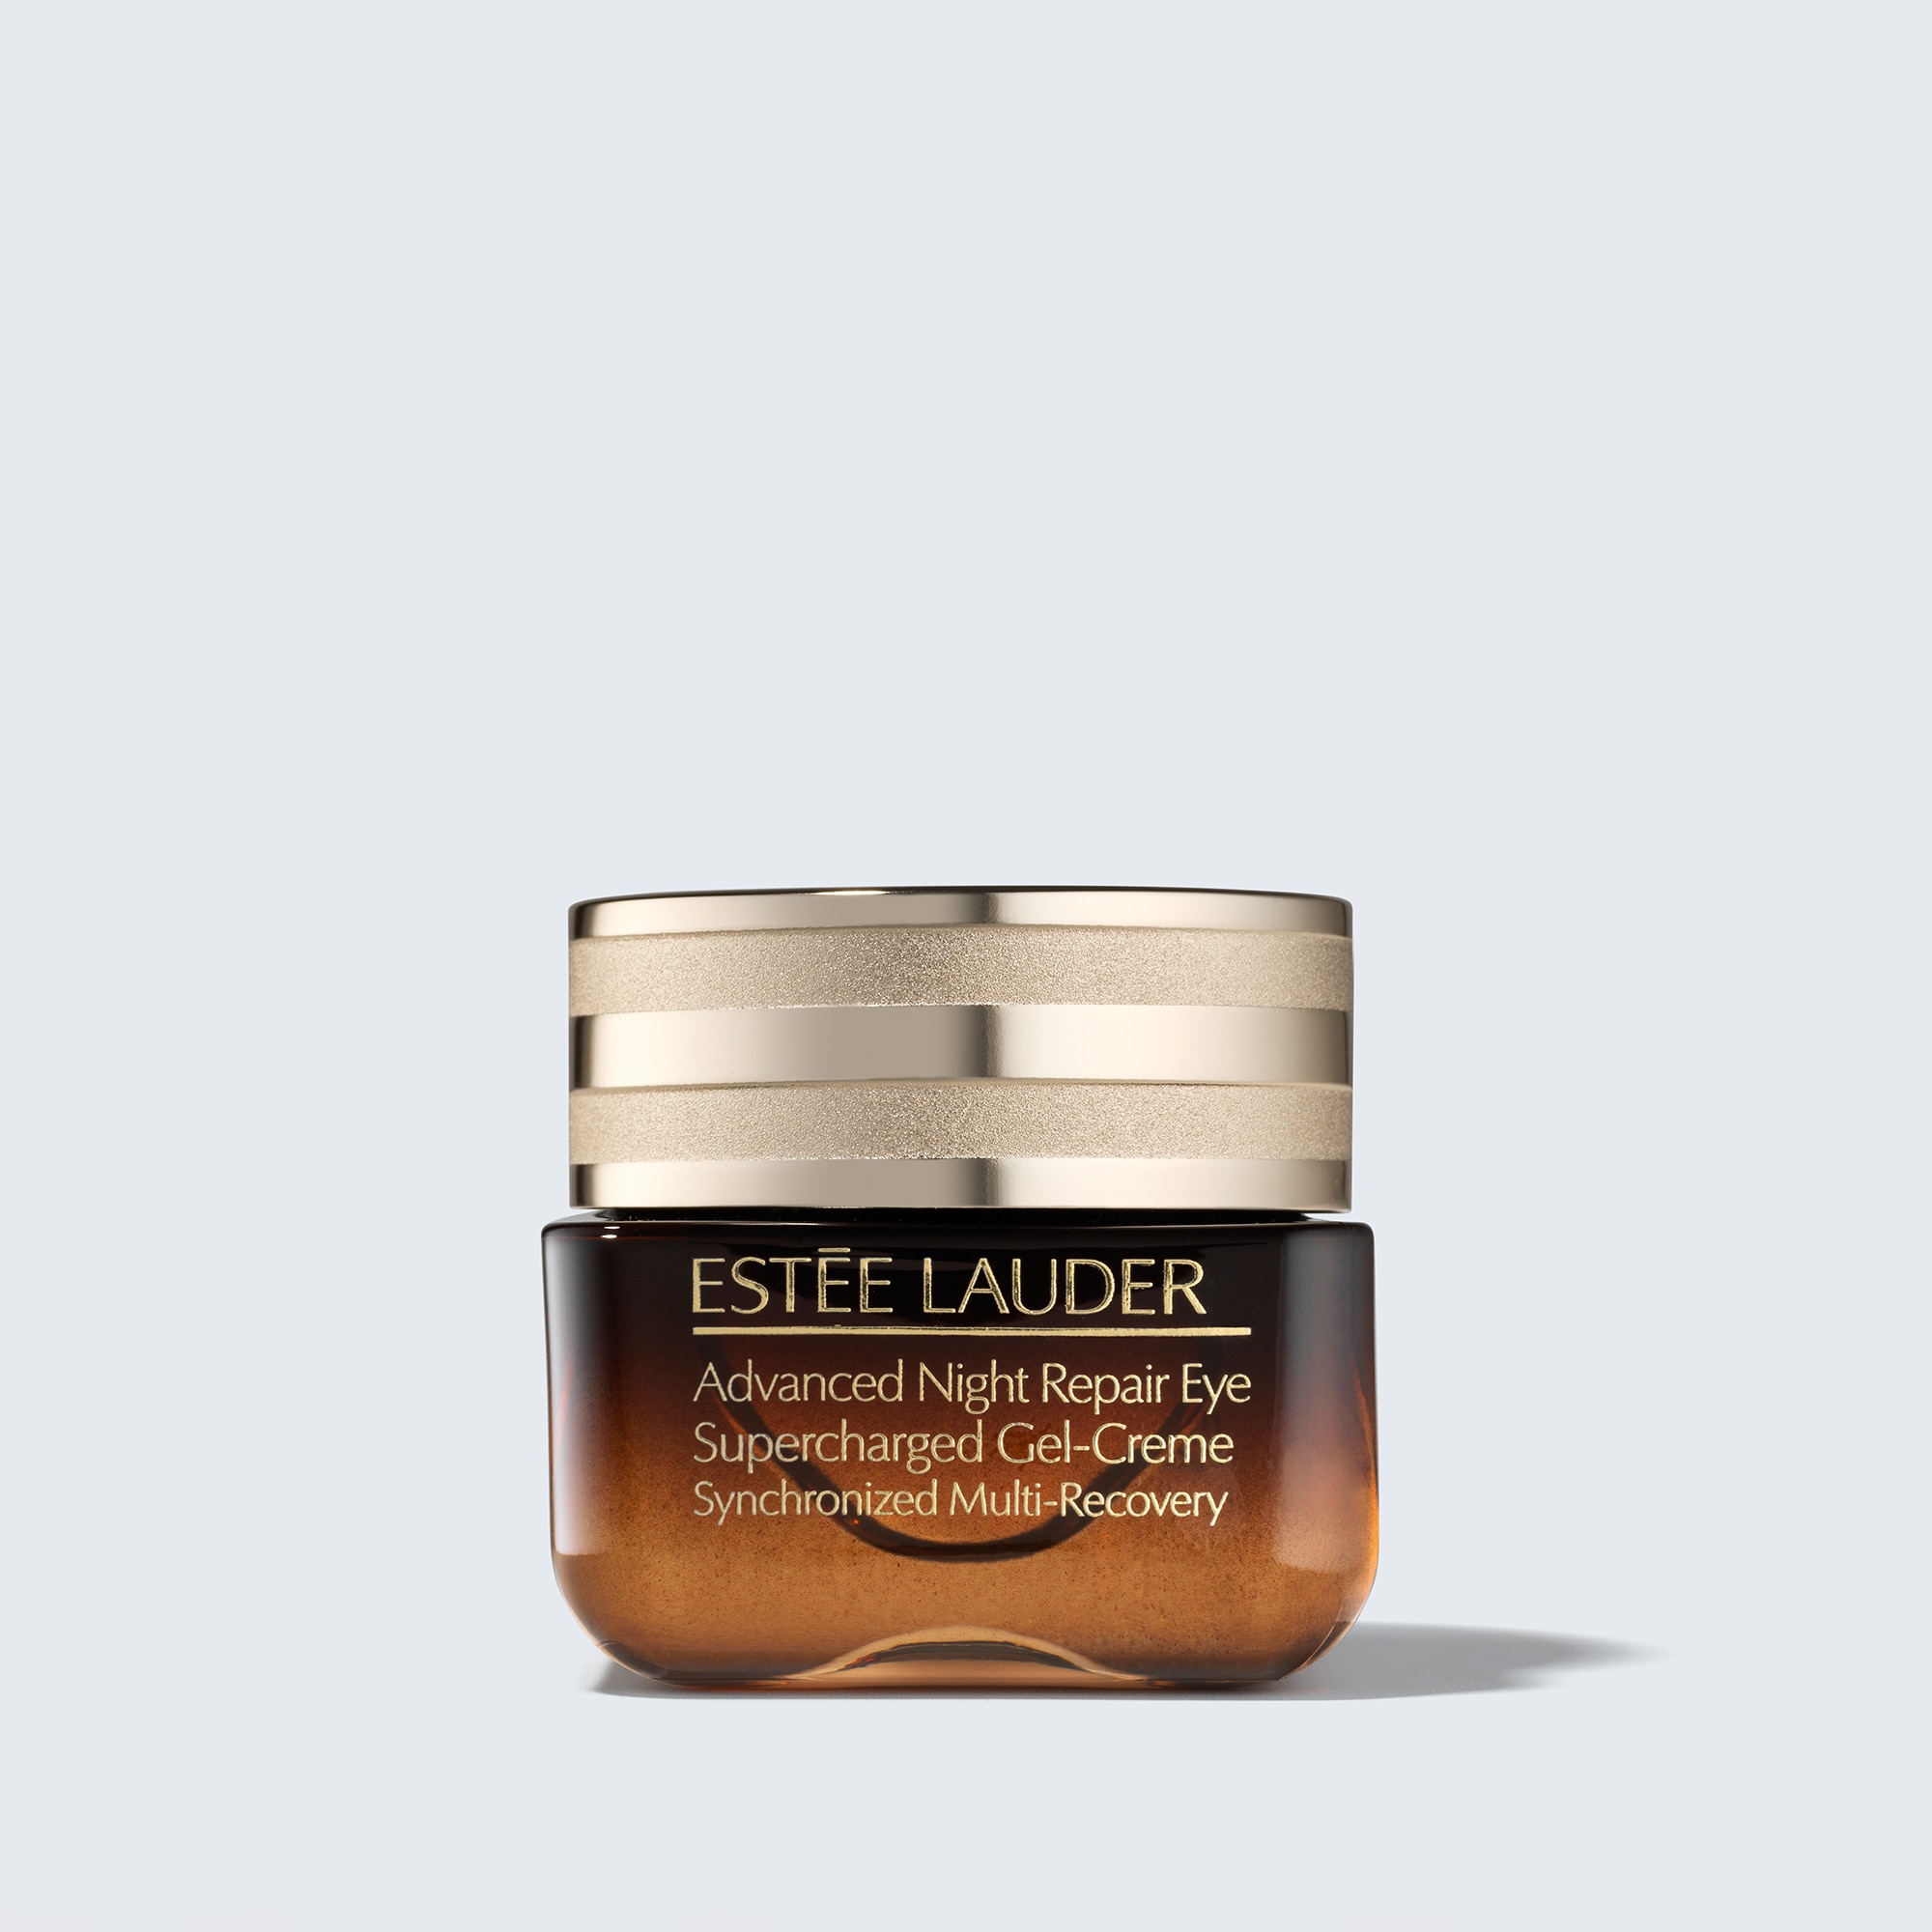 Estée Lauder Advance Night Repair Eye Supercharged Gel-Creme Synchronized Recovery - Duluxe Sample Size: 5ml